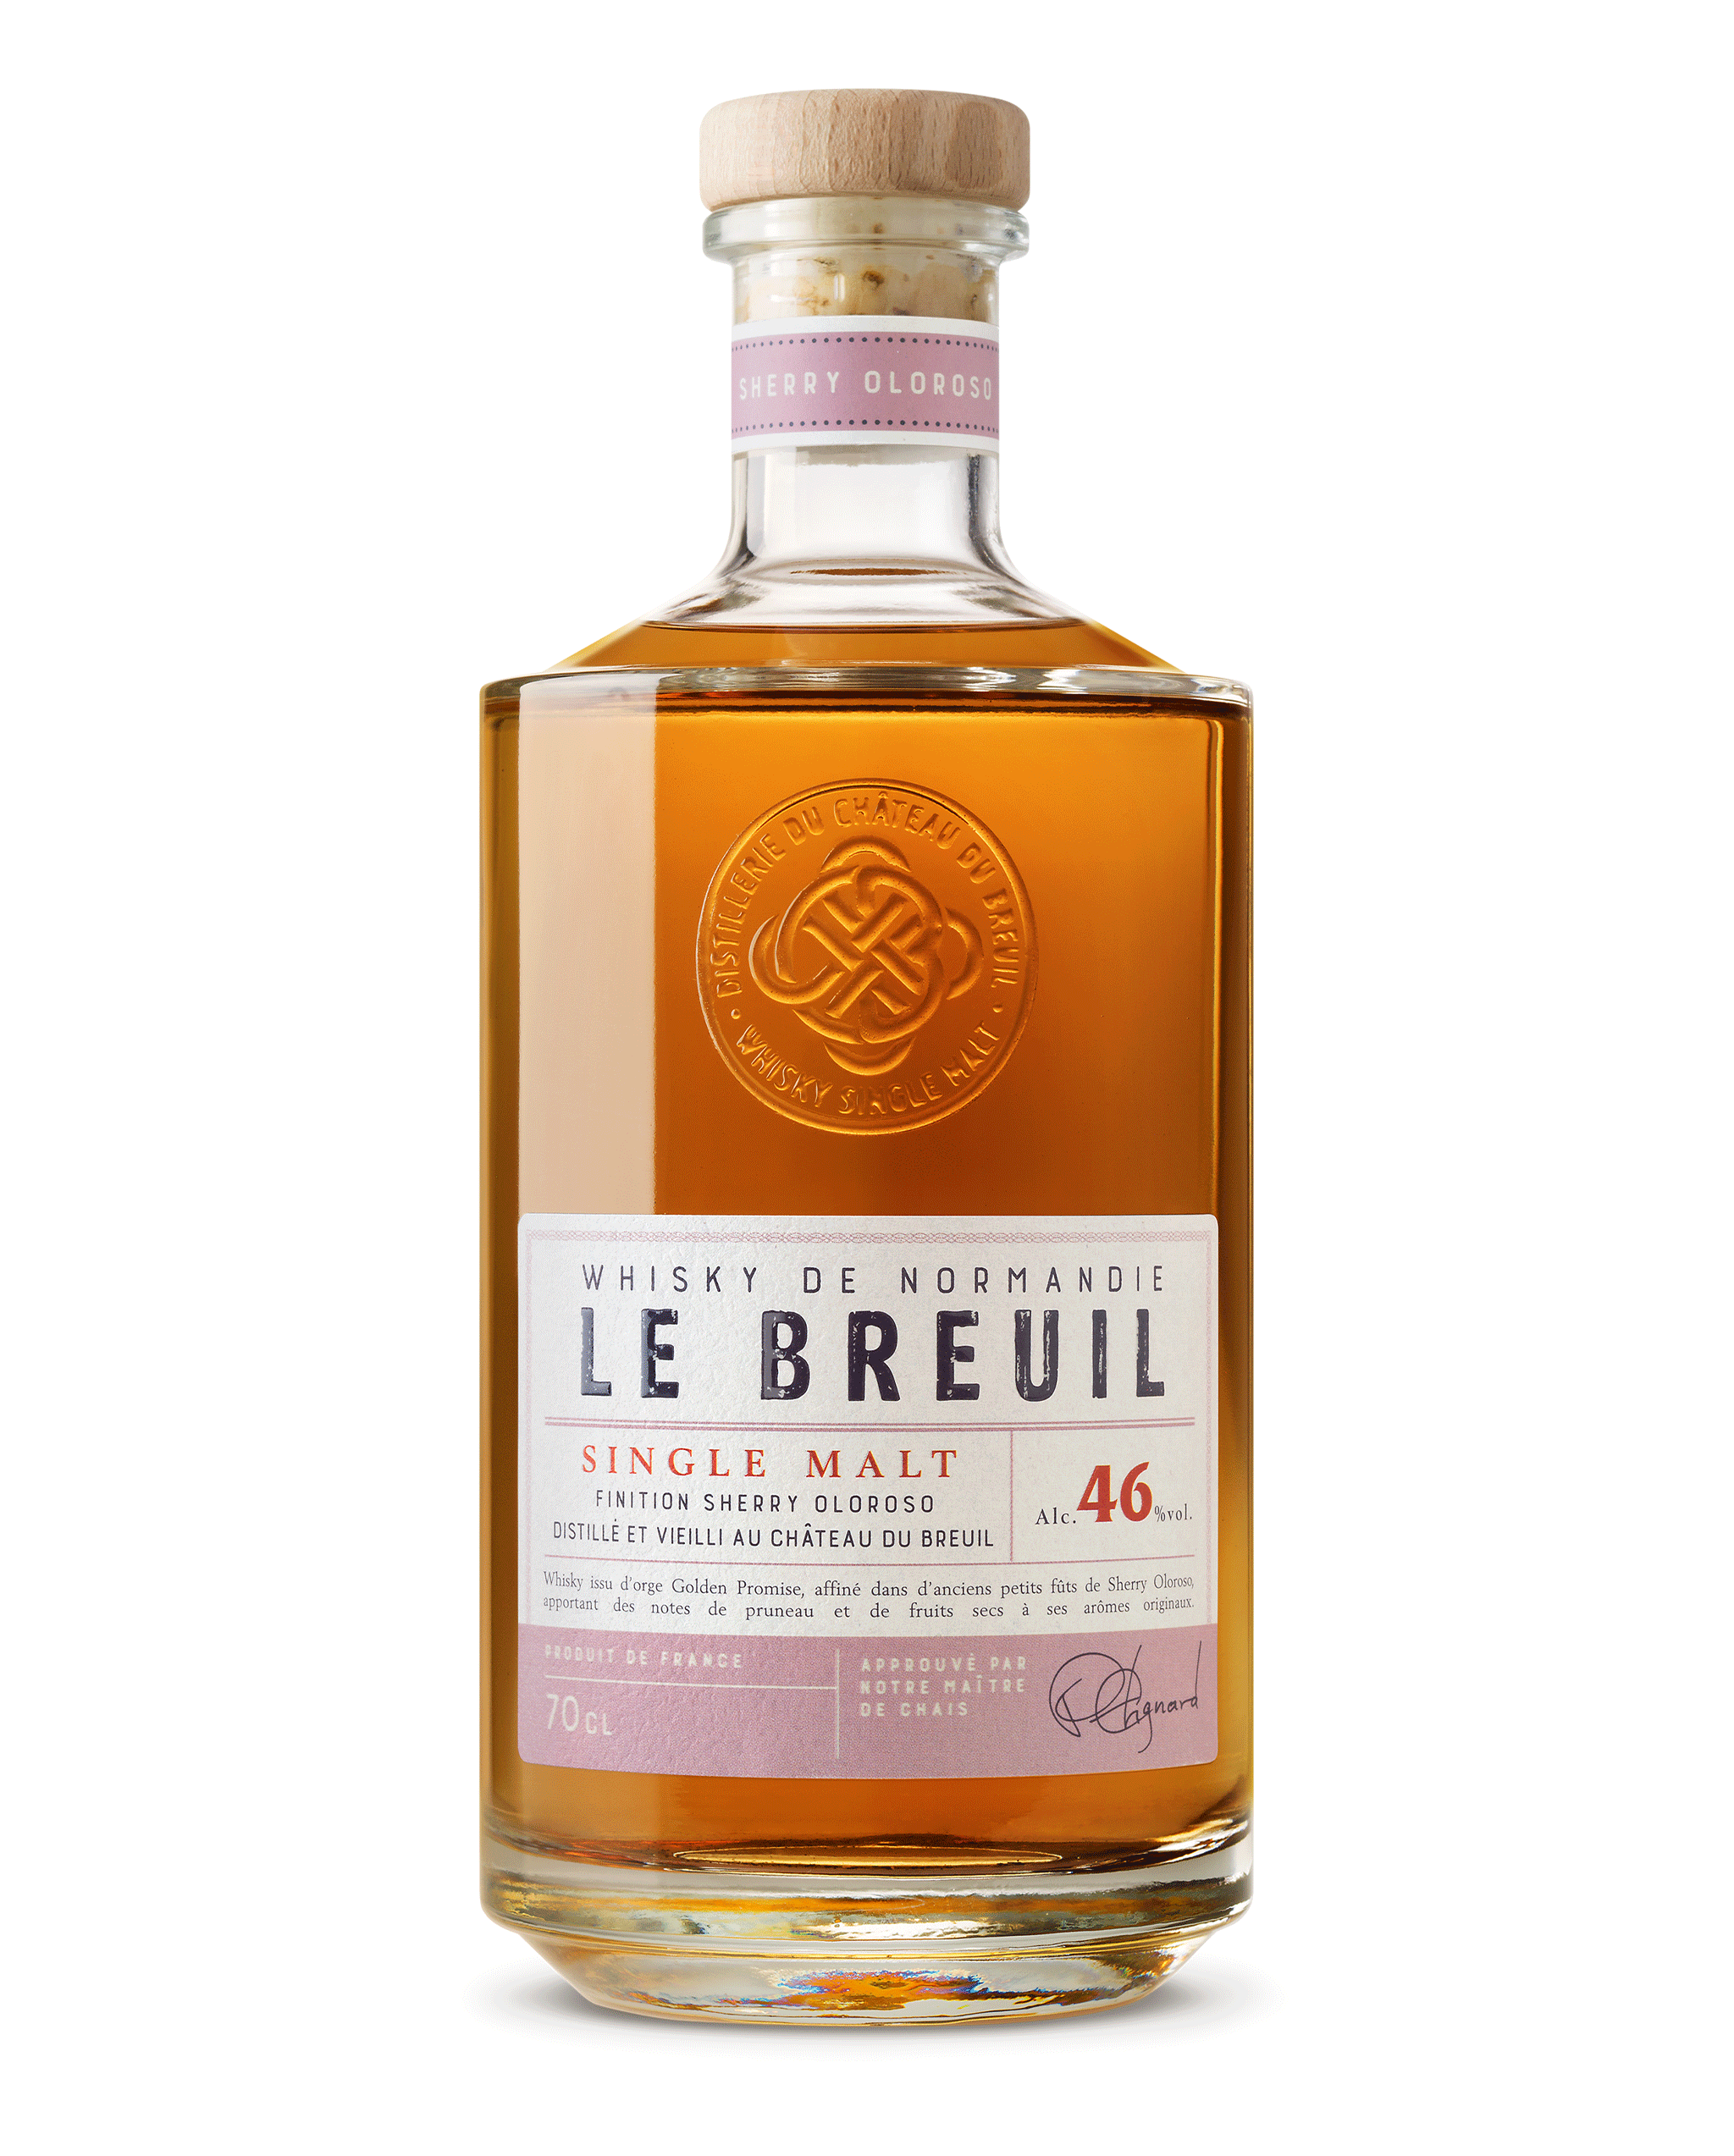 Whisky Le Breuil Finition Sherry Oloroso